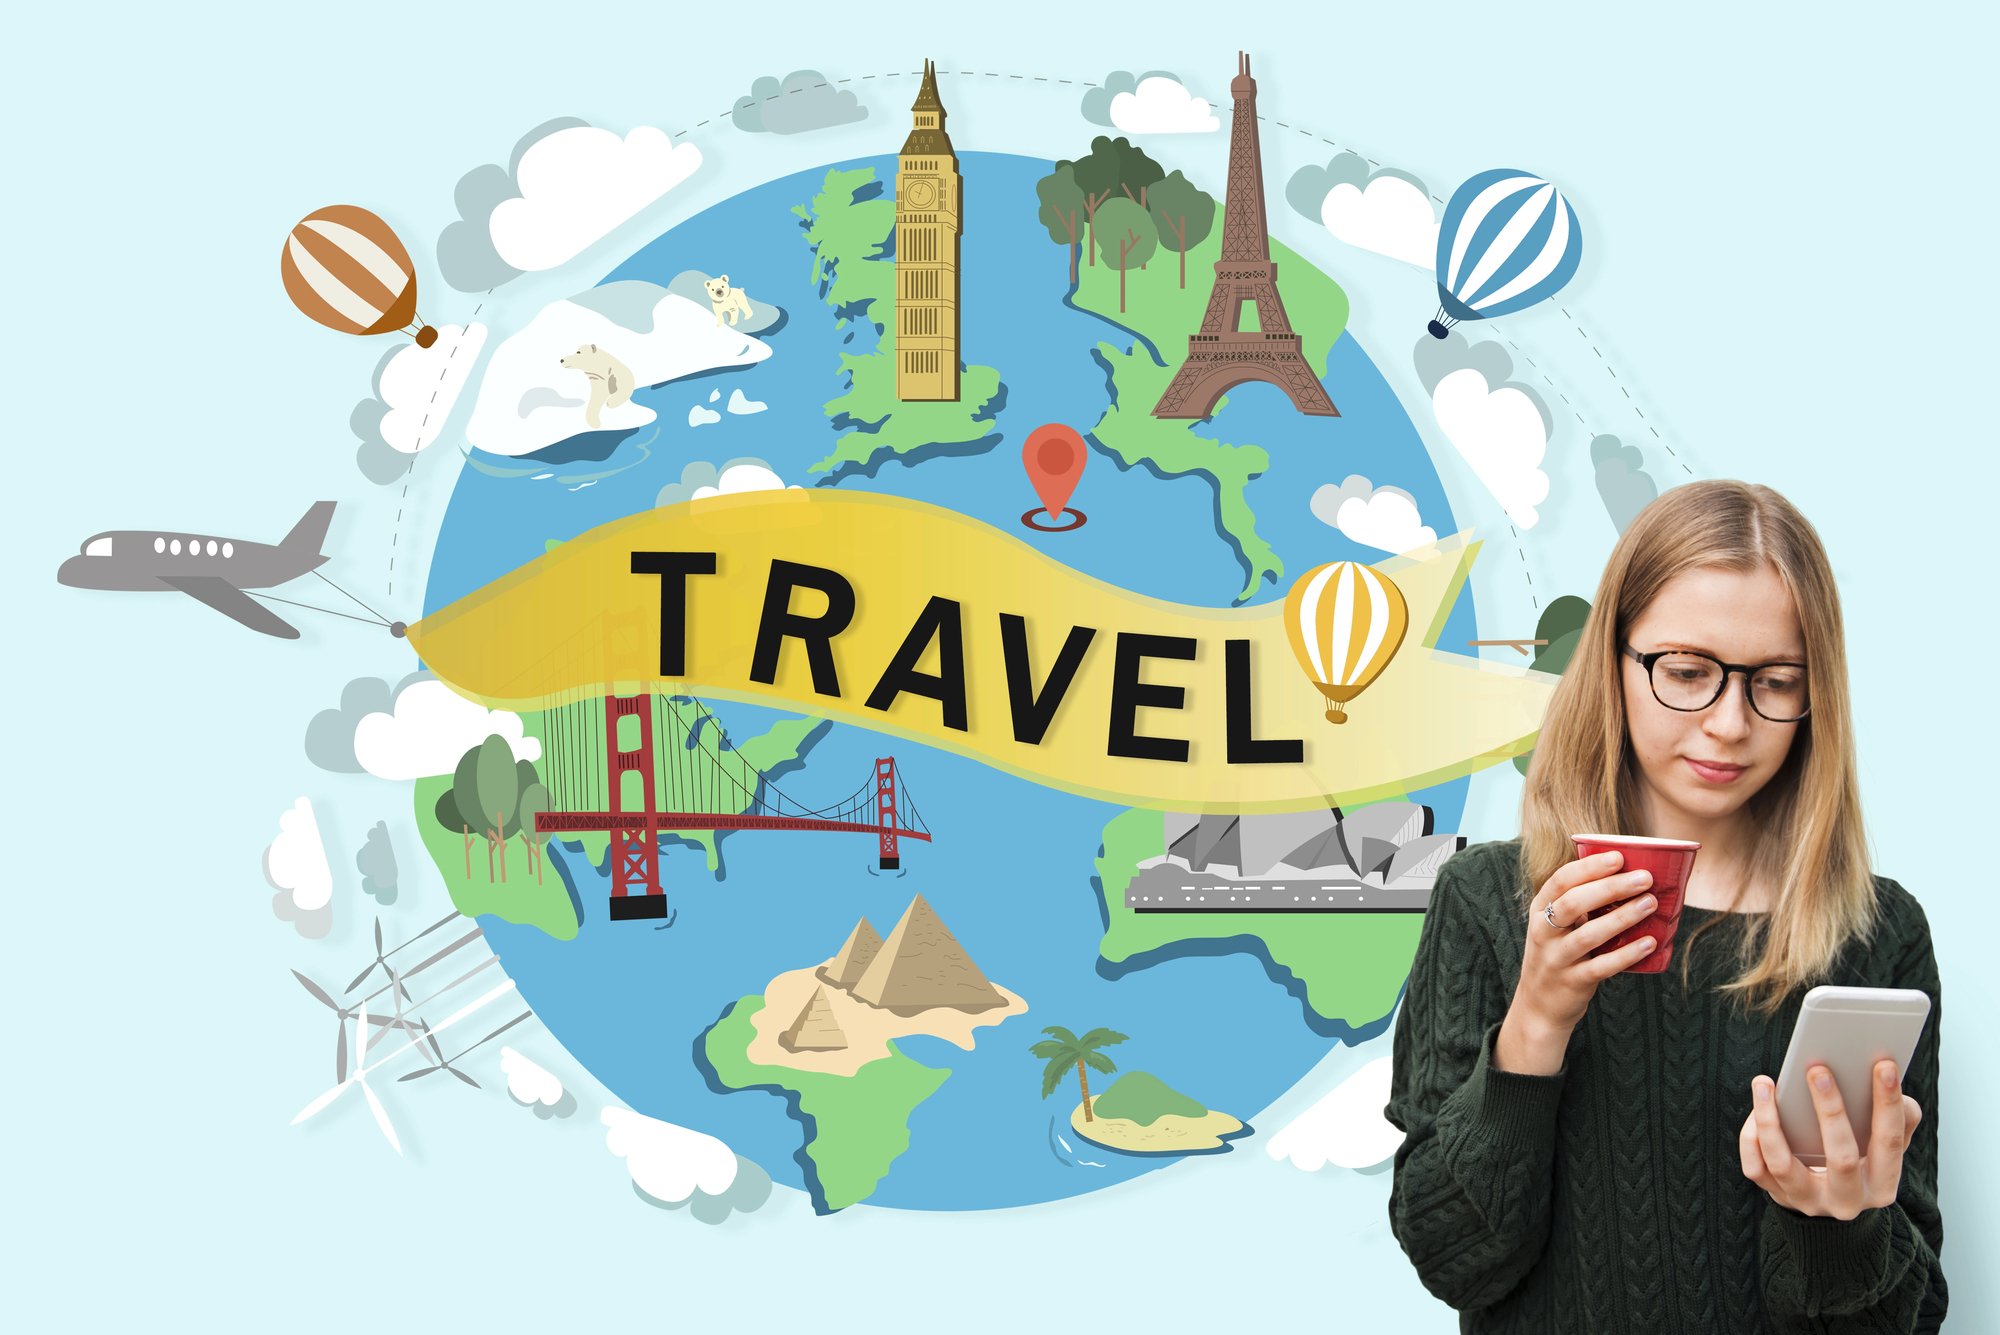 Best Travel Apps for Solo Female Travelers - Travel apps